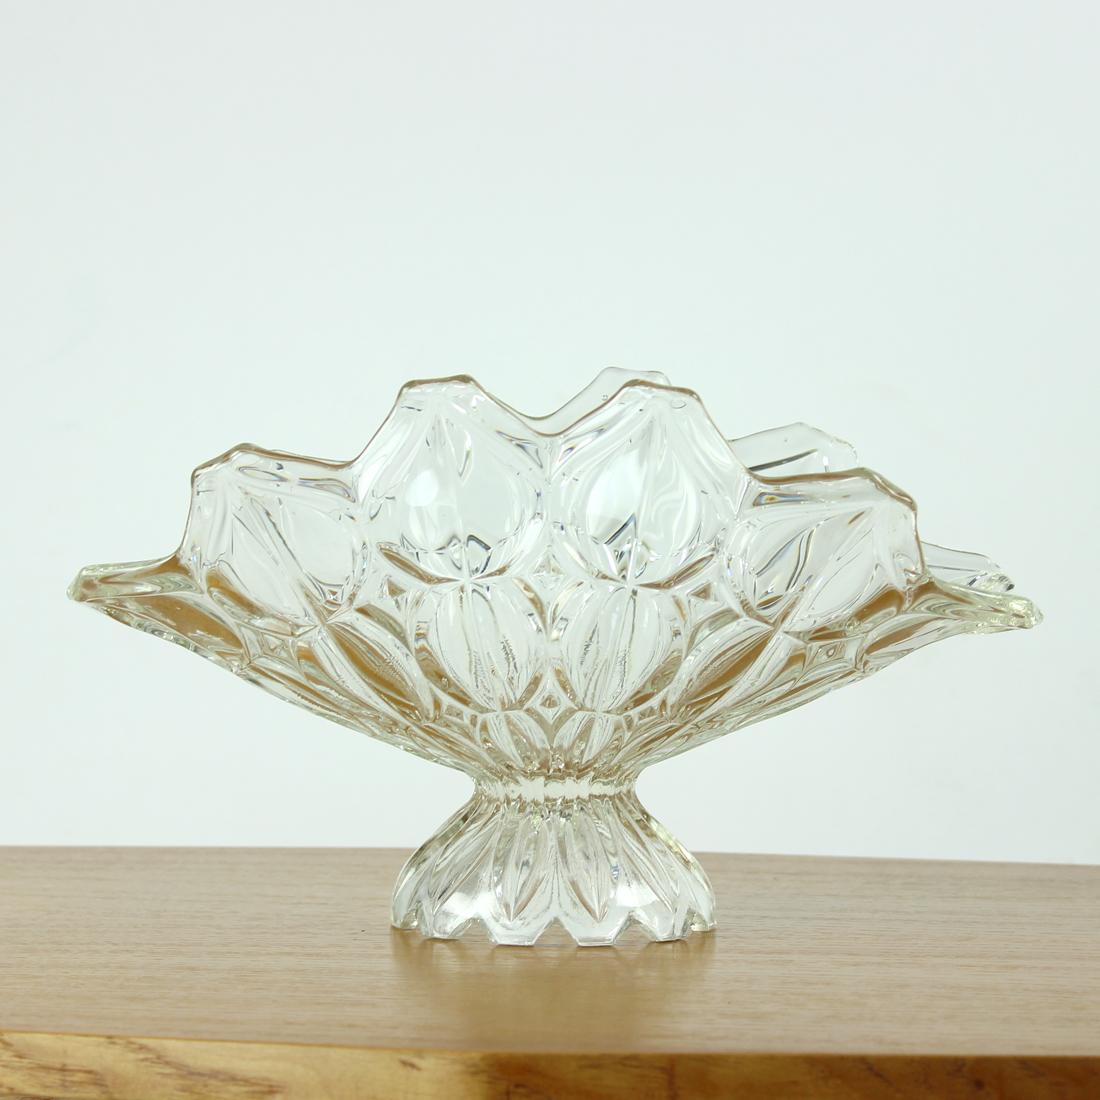 Large Pressed Glass Bowl, Tulip Collection Hermanowa Hut, 1957 In Excellent Condition For Sale In Zohor, SK